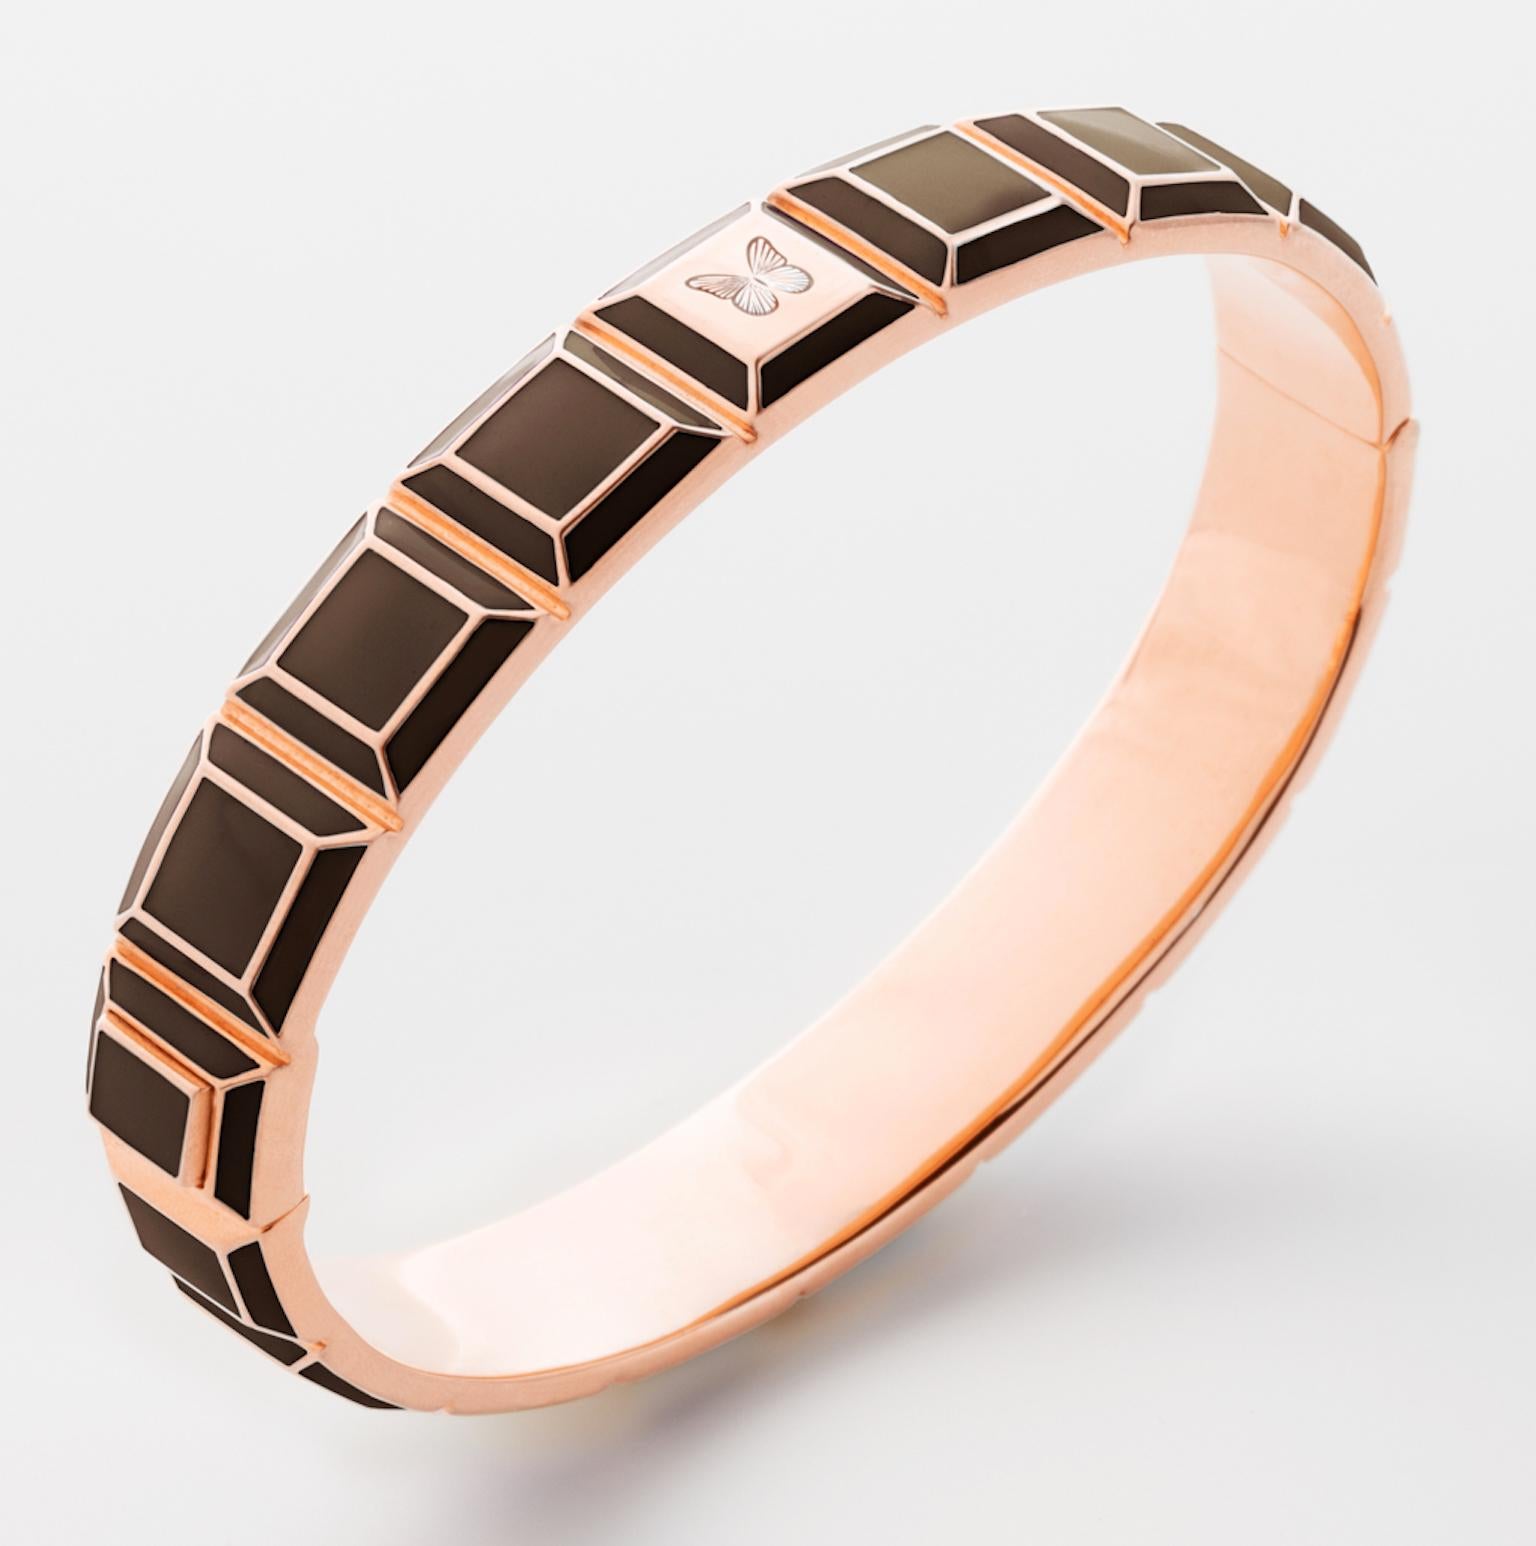 Gold-Plated Enamel Carousel Bracelet features a Rose Gold-Plated Silver bracelet with Brown Enamel and Butterfly Engraving, along with a clasp closure that secures the bracelet onto the wearer's wrist. 
Rose Gold-Plated Silver, Brown Enamel
From the